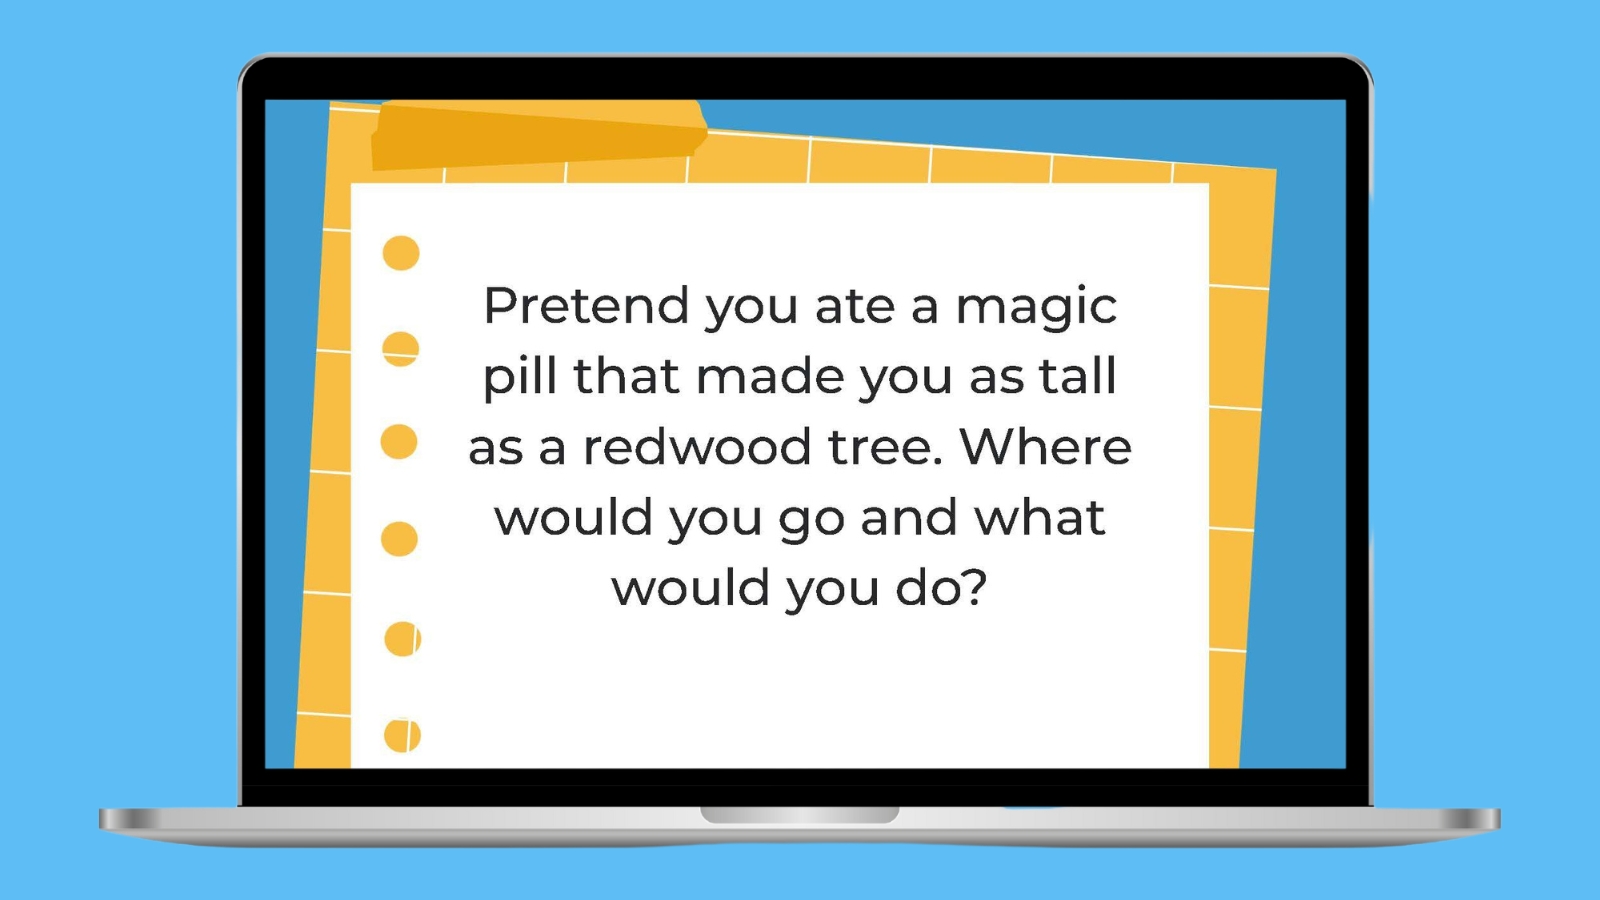 Pretend you ate a magic pill that made you as tall as a redwood tree. Where would you go and what would you do?